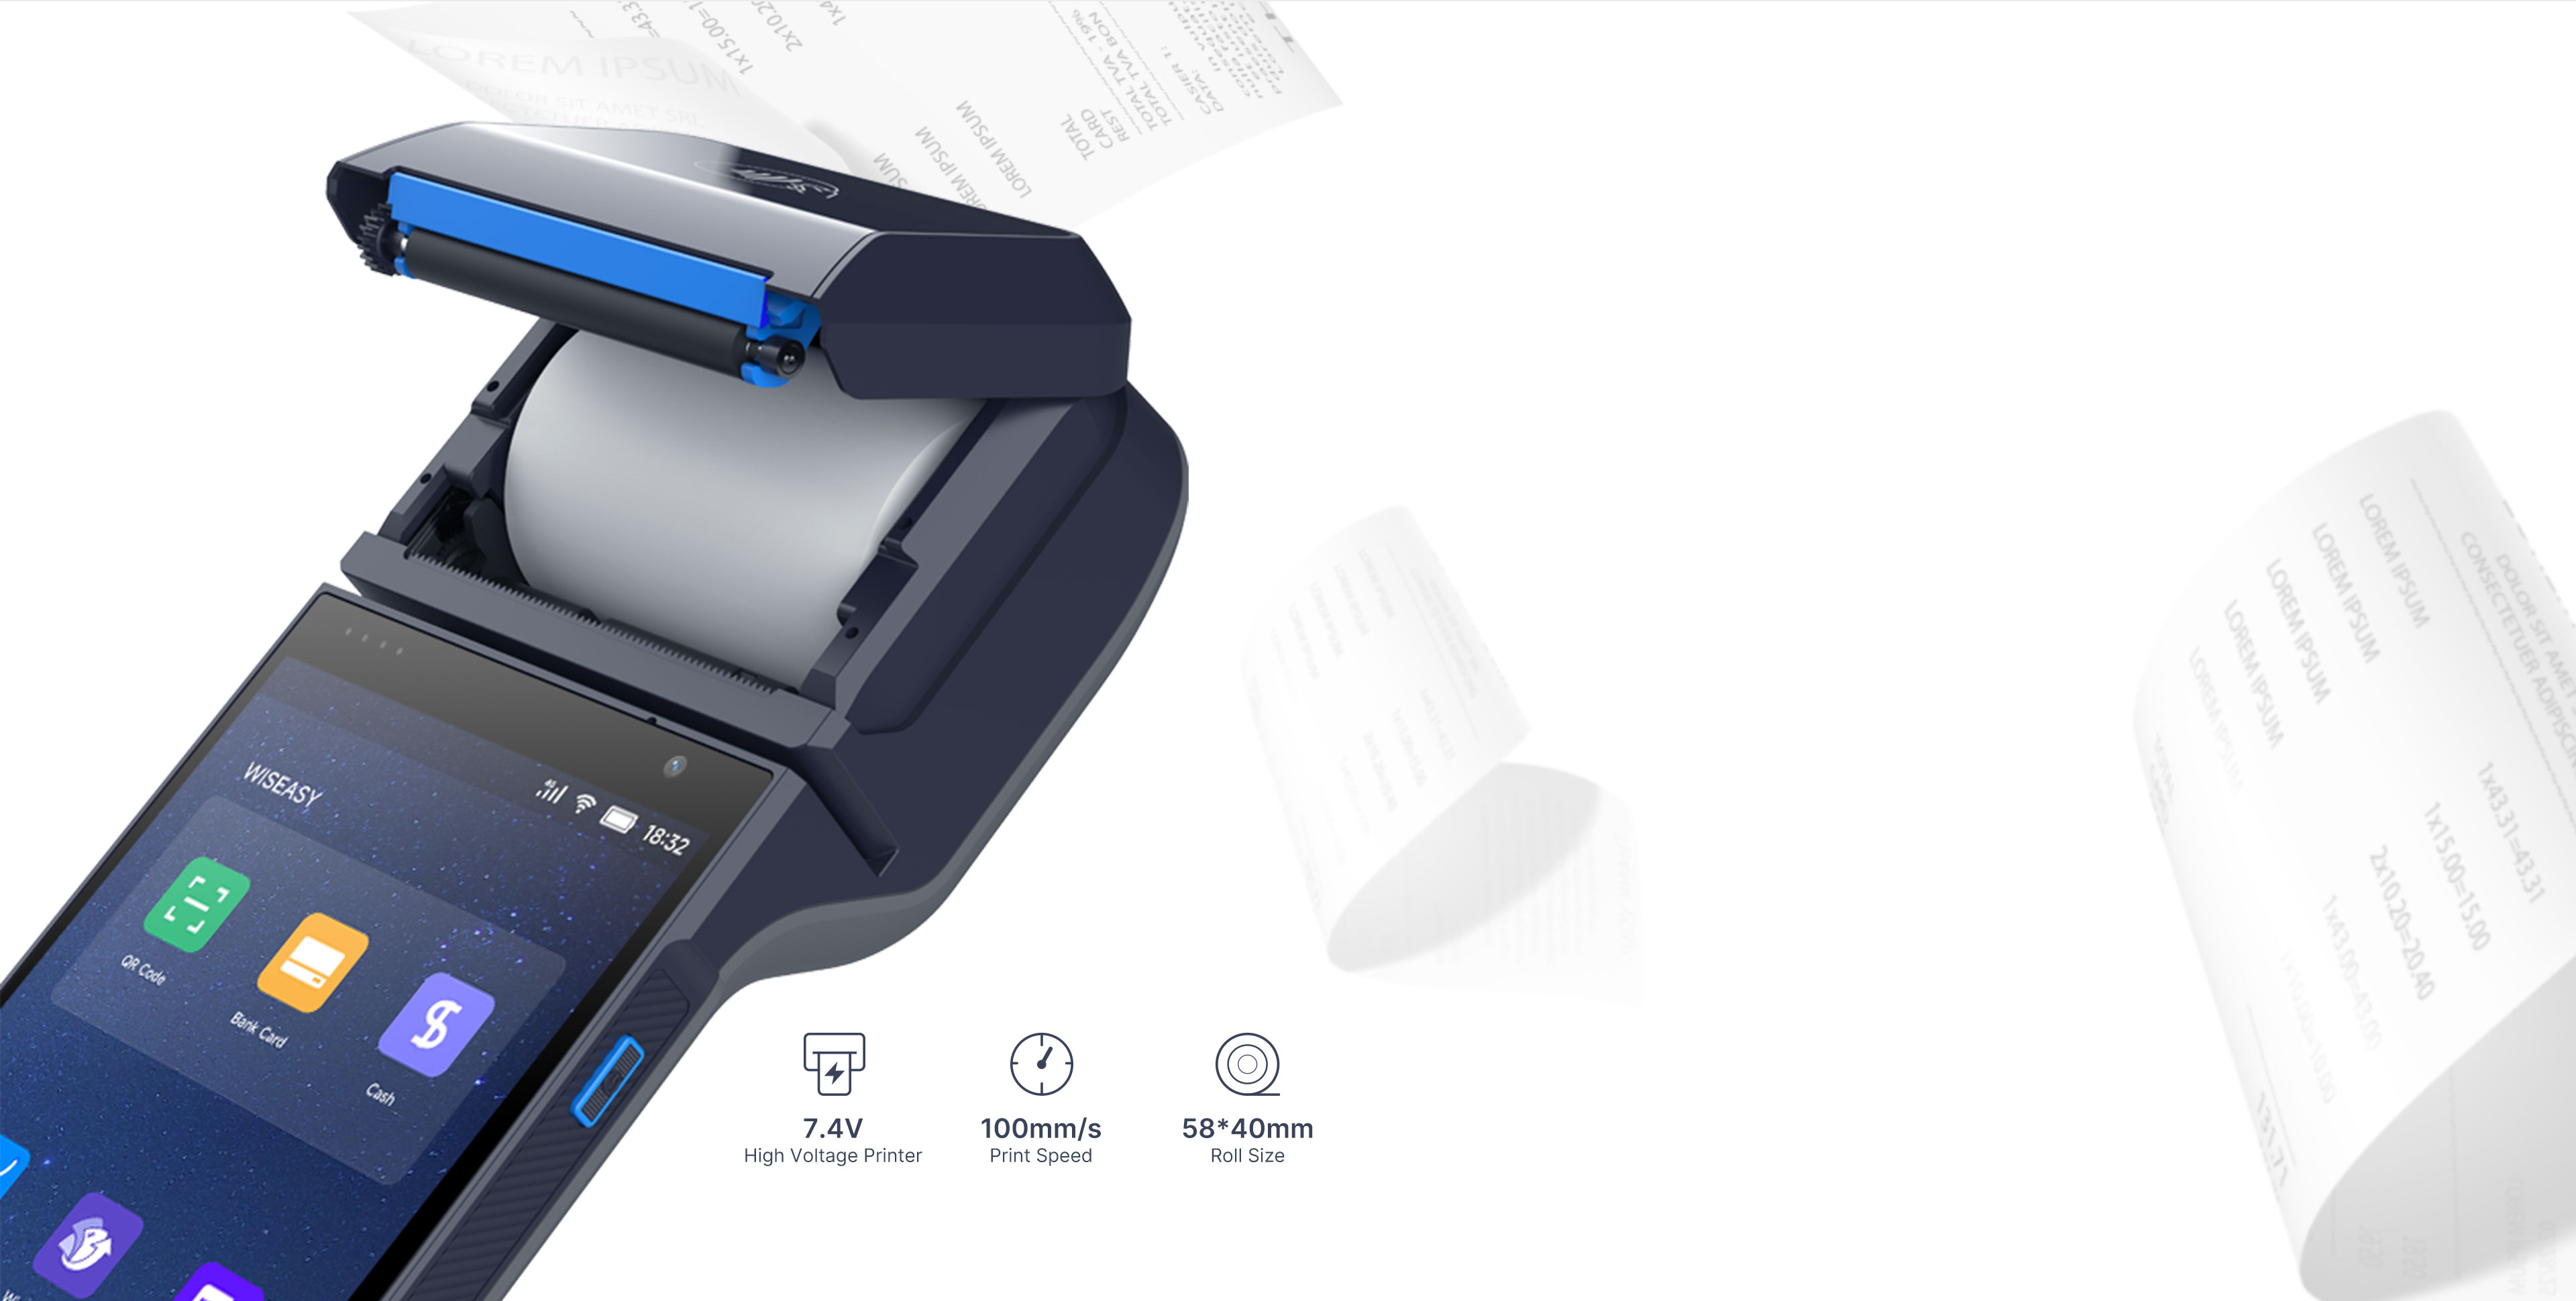 Reliable high-speed printer enables fast receipt printing